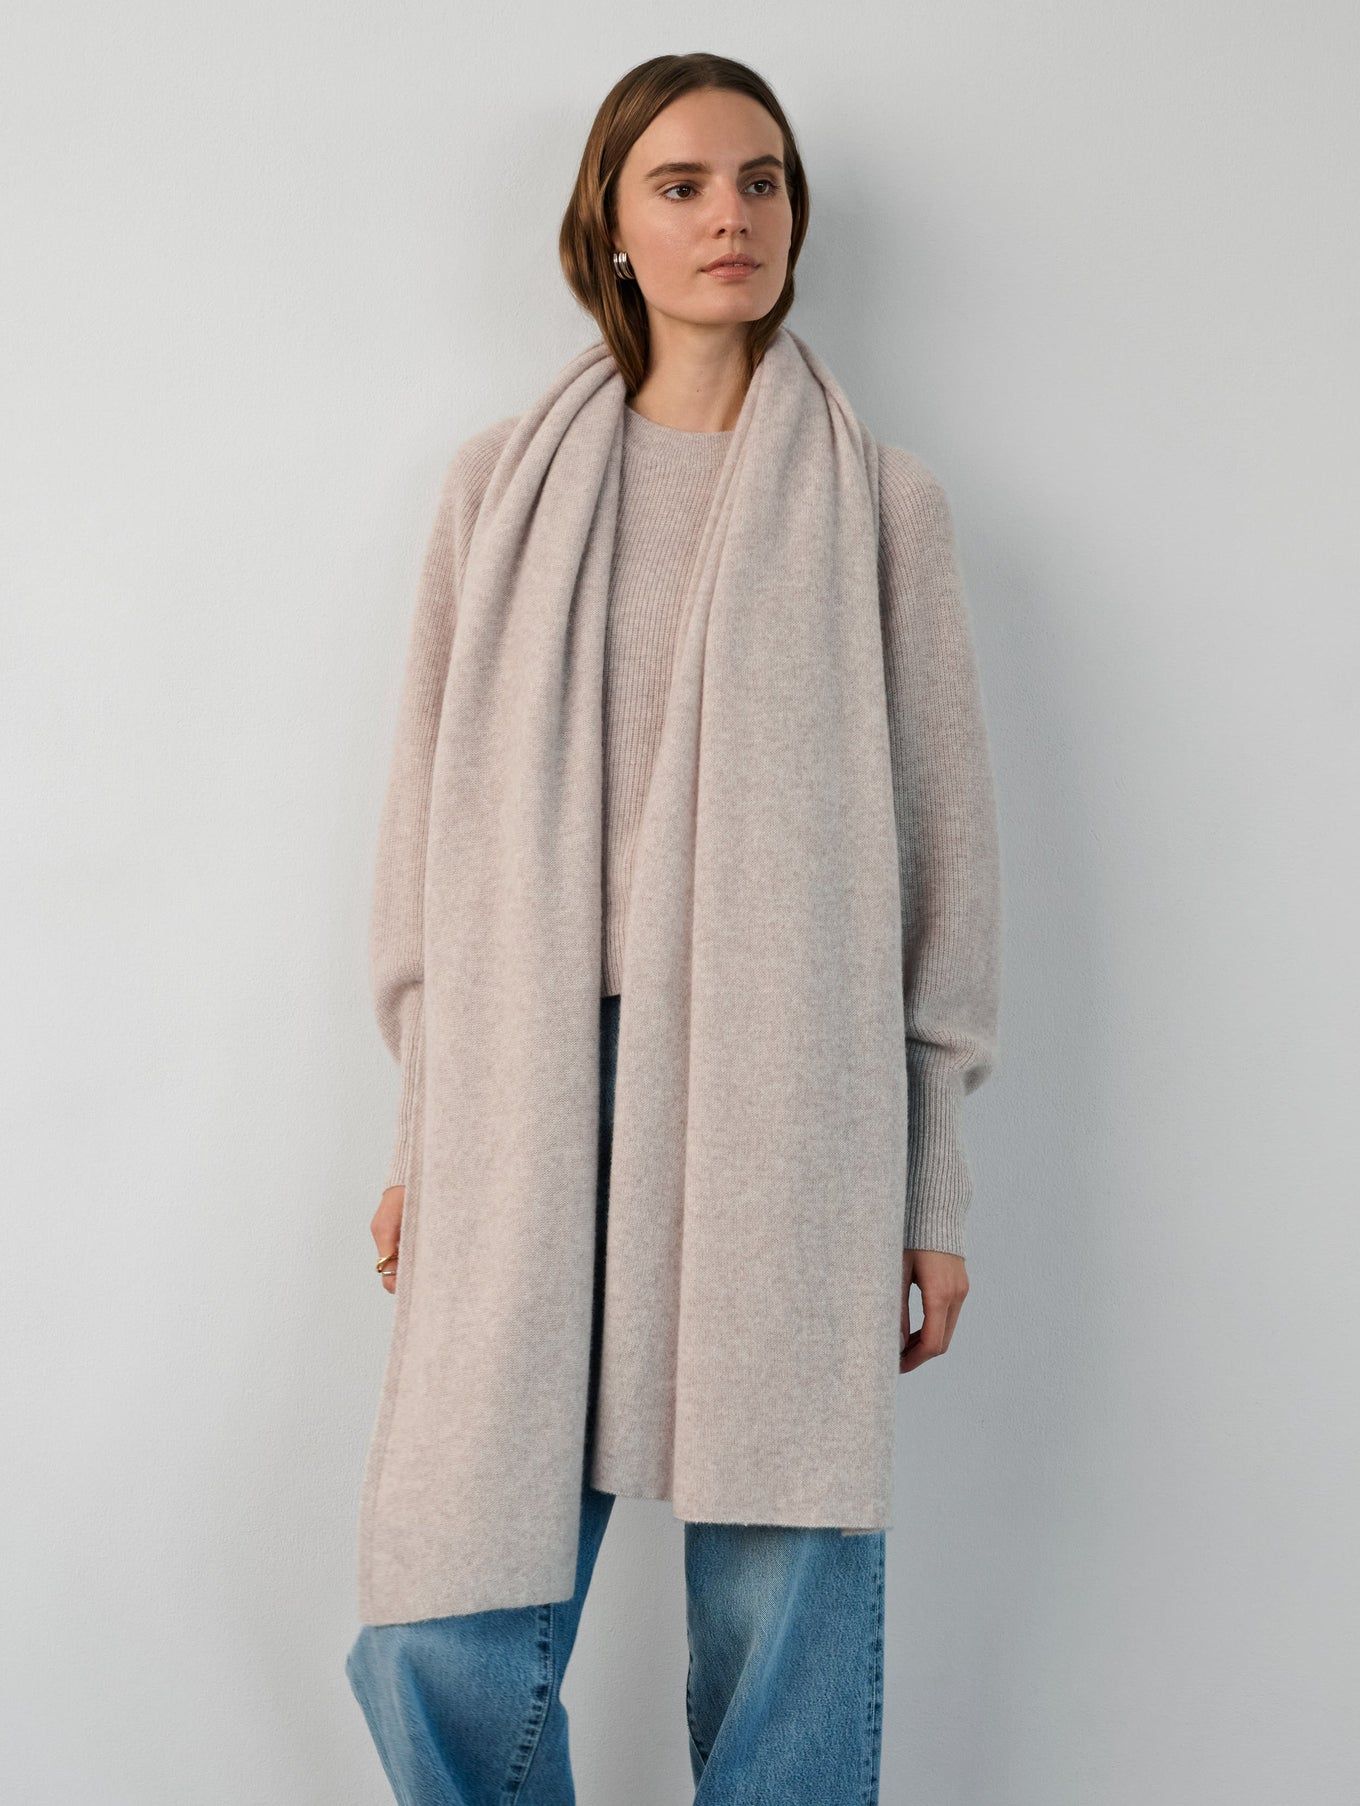 Found: A Ridiculously Cozy Cashmere Wrap That's Stylist-Approved And ...